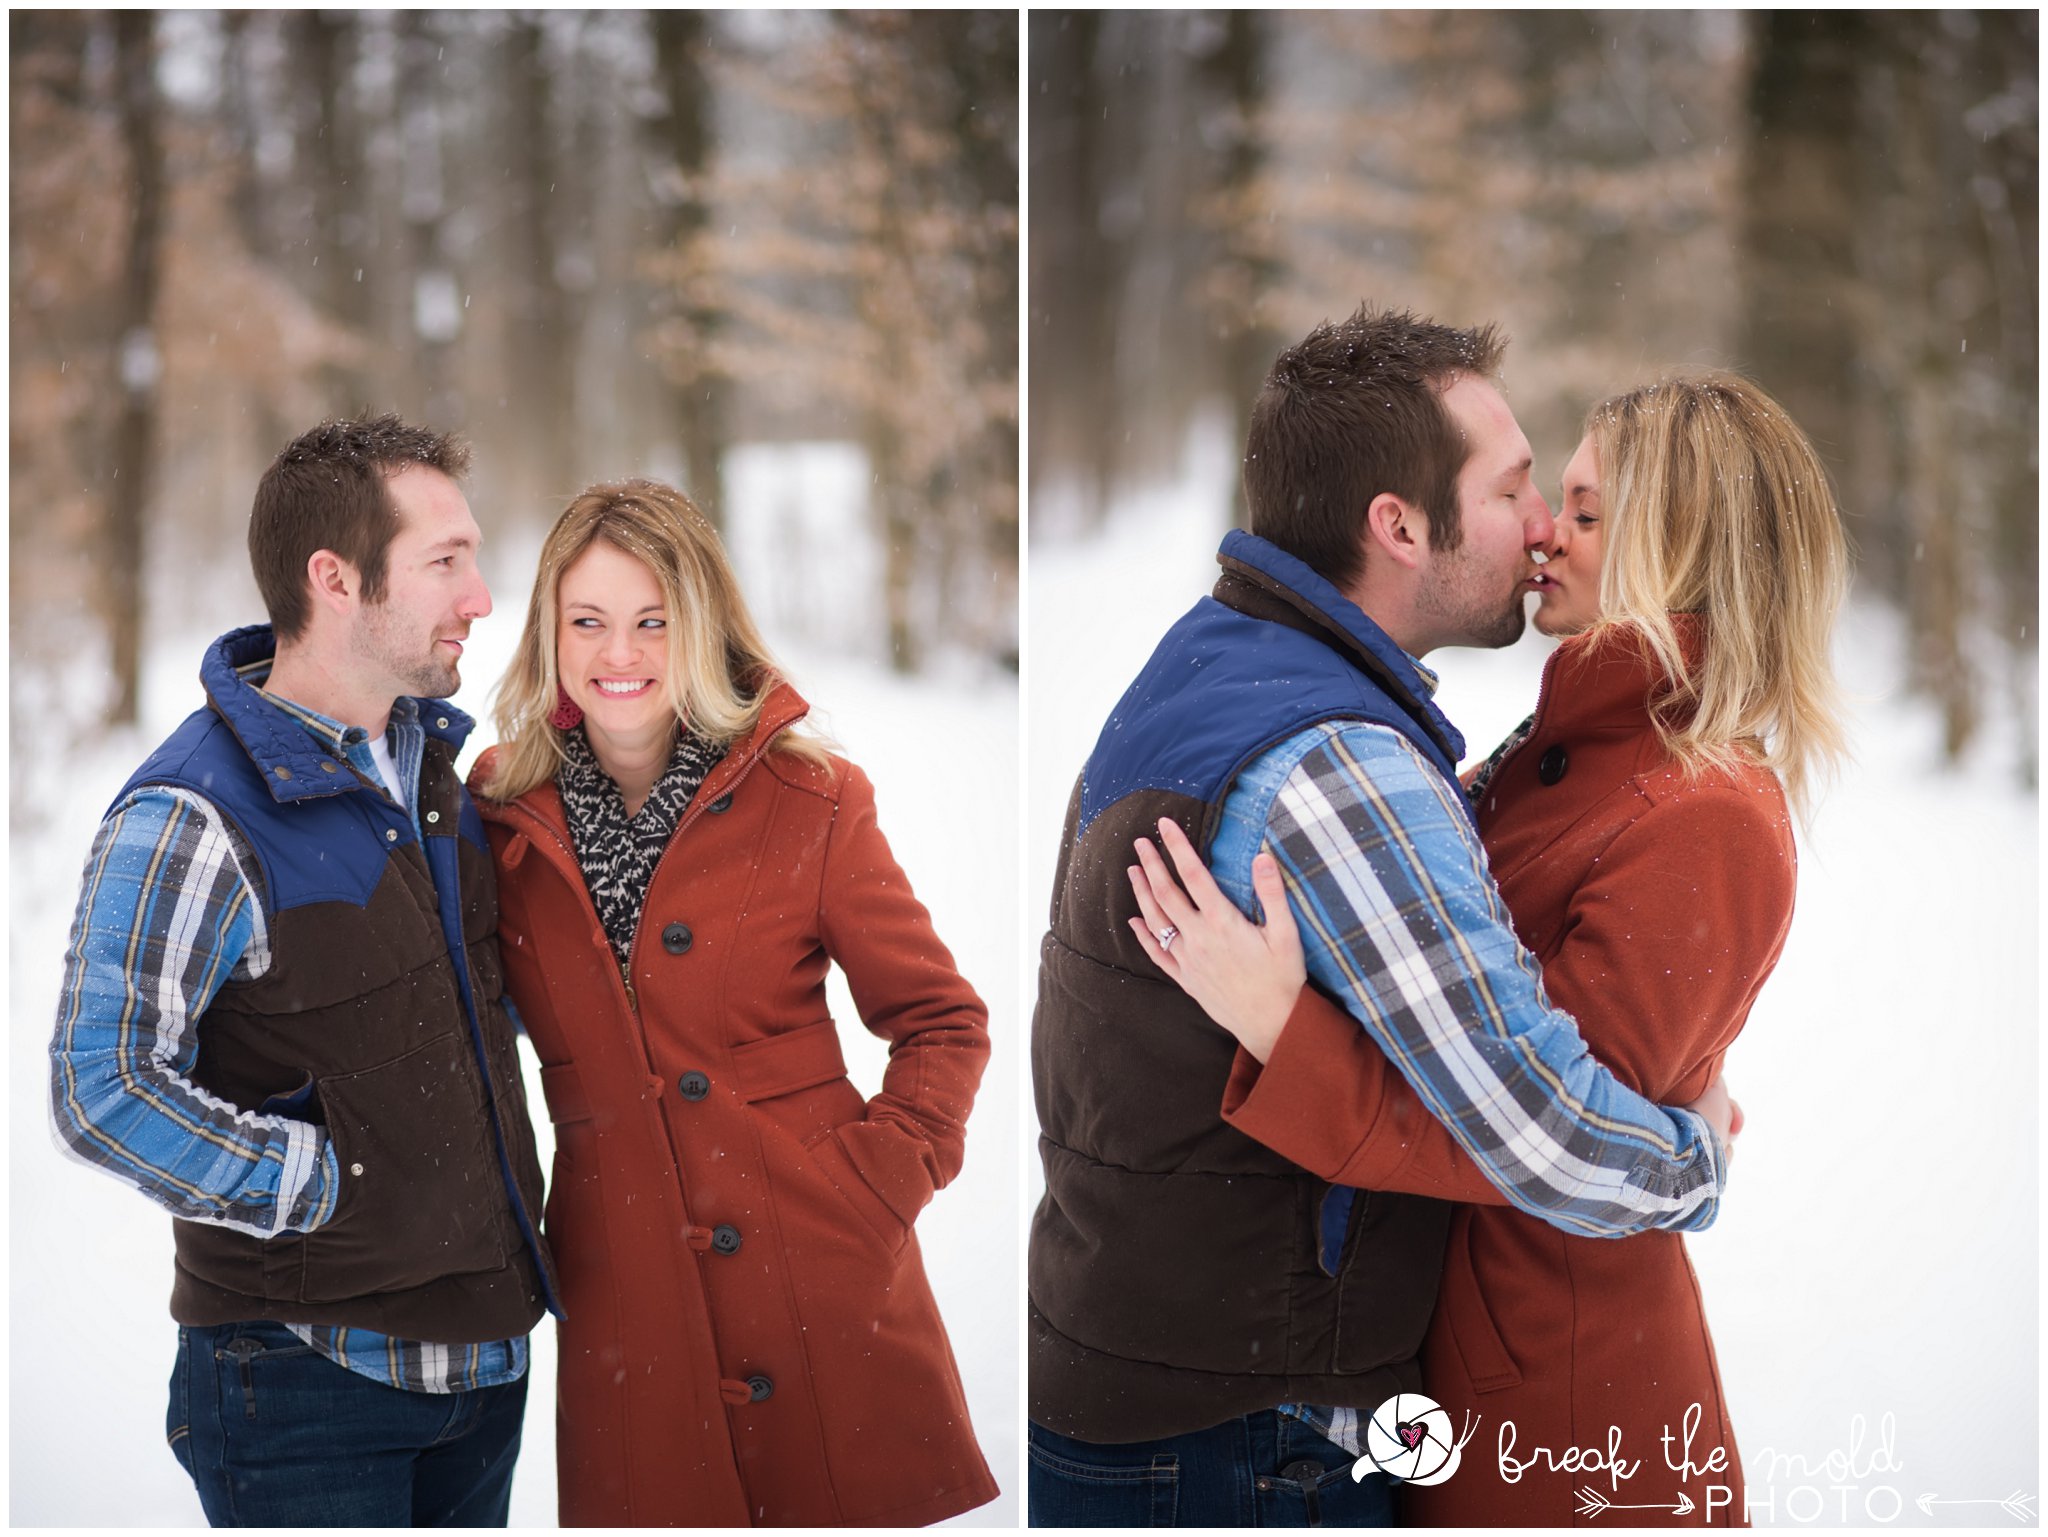 break-the-mold-photo-snowy-day-engagement-photos-knoxville-tn-tennessee-snow-day-pictures-winter-outdoor-unique-family_1502.jpg